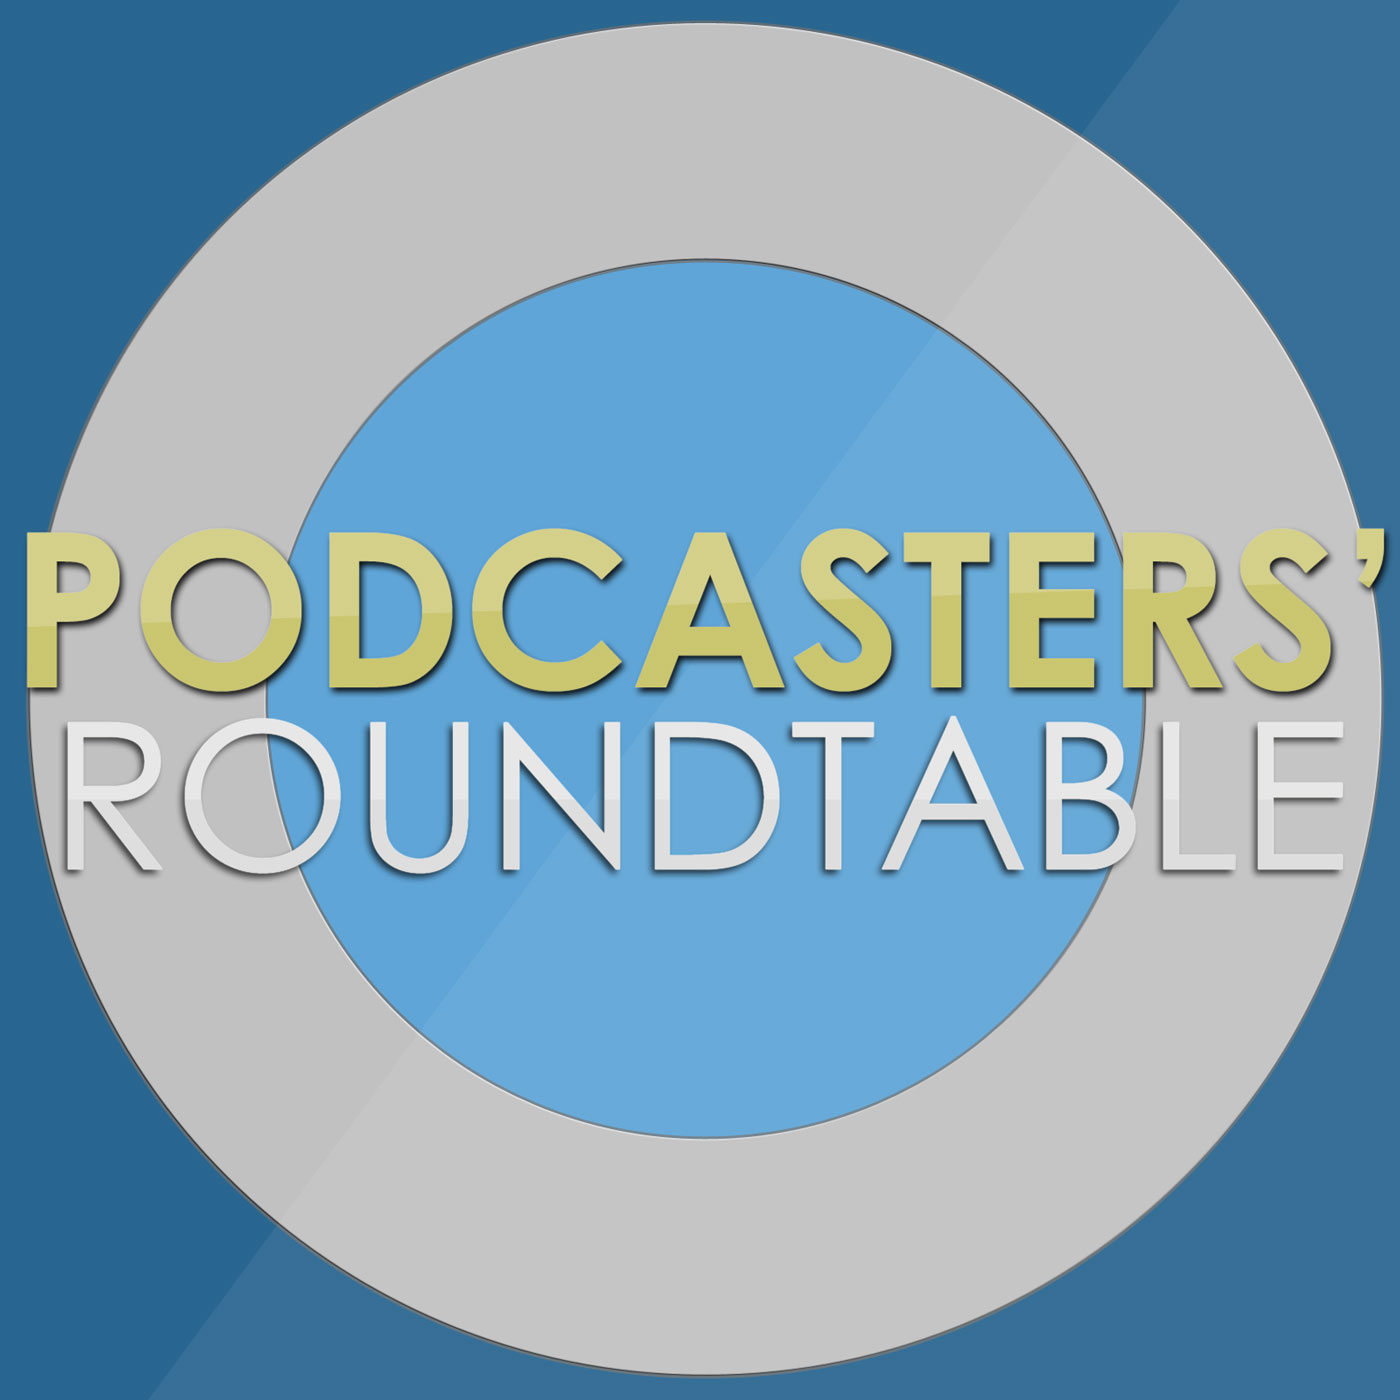 The Podcasters' Roundtable